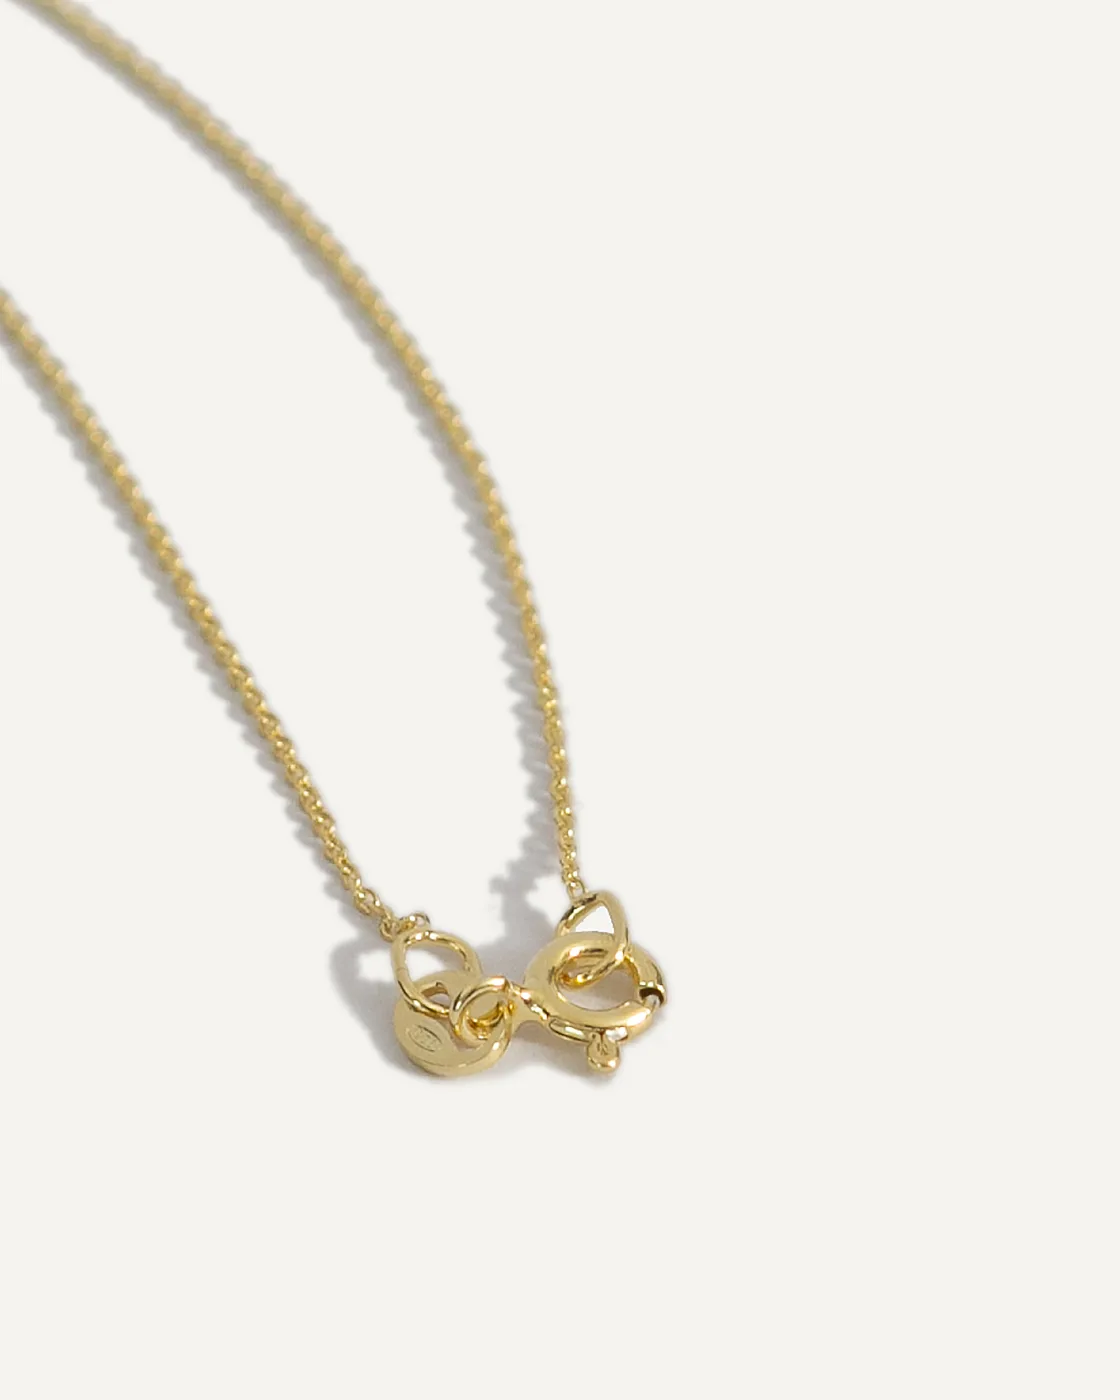 Gold-Plated Sterling Silver Letter Pendant N